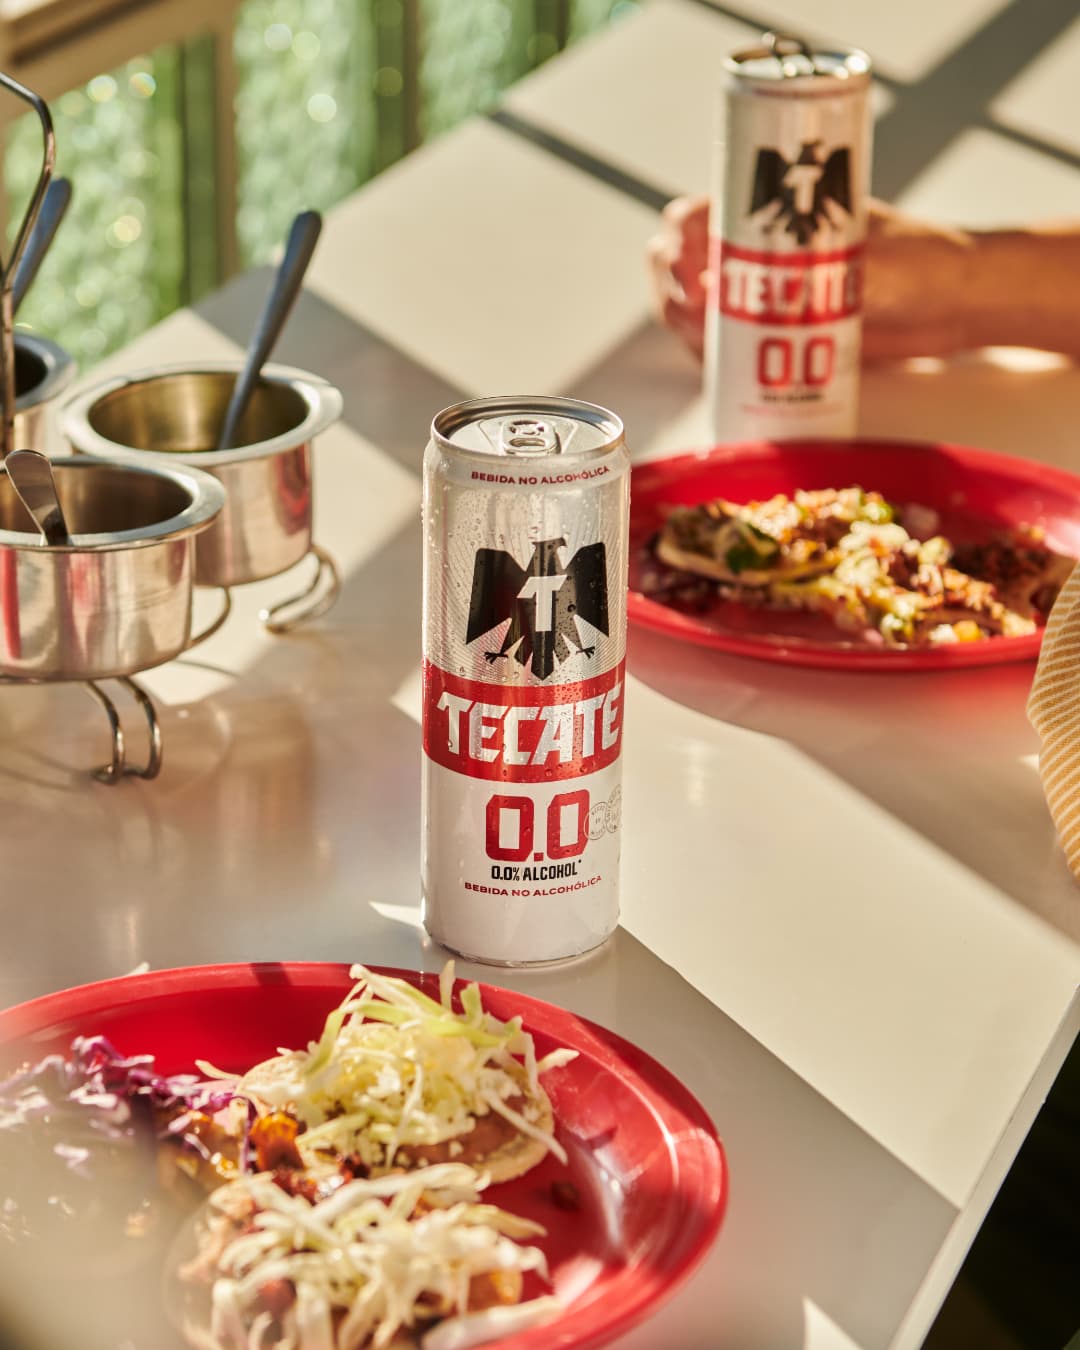 Tecate 00 
 beer can and tacos